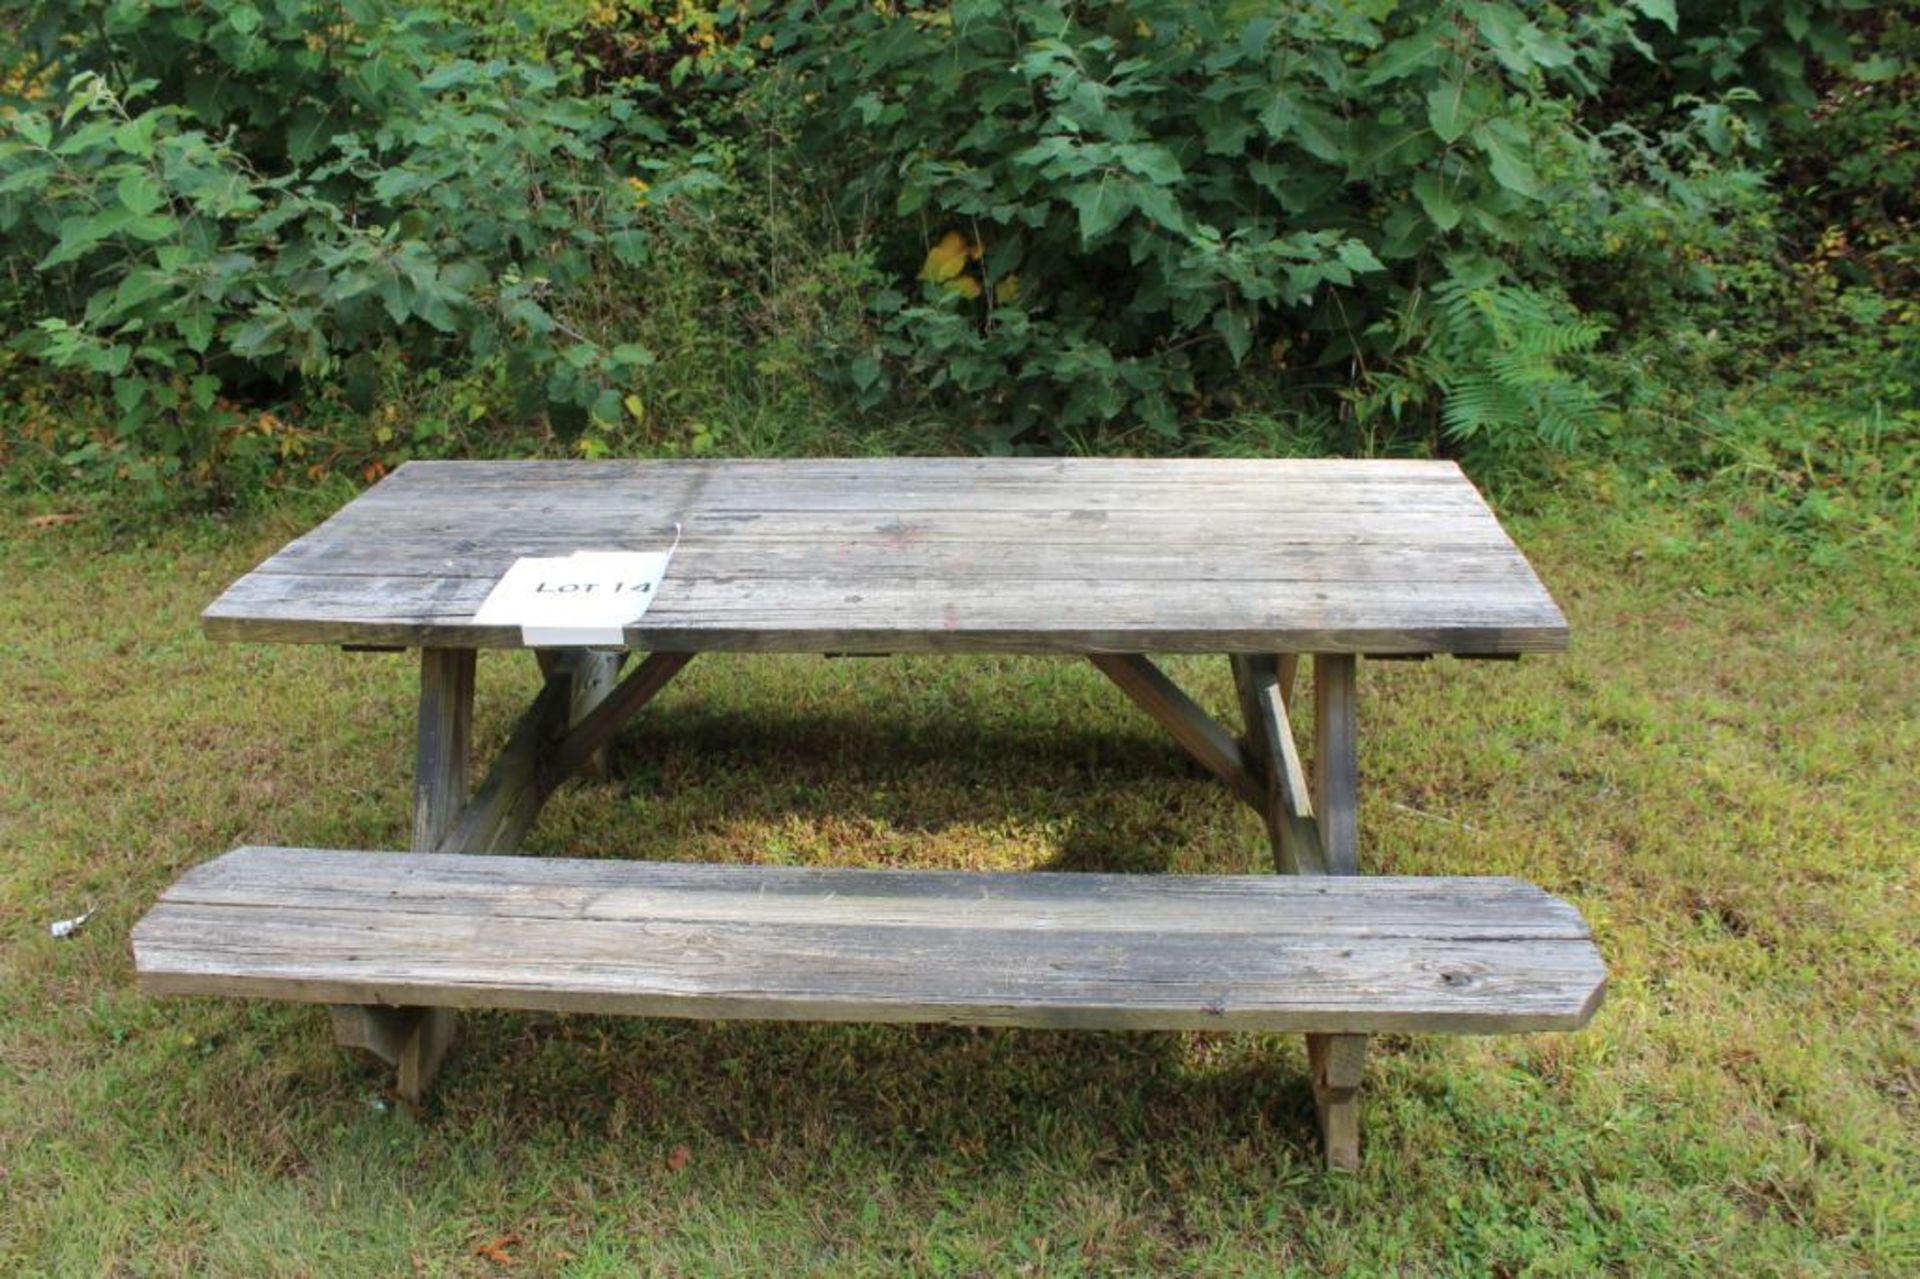 Picnic table w/ pond accessories - Image 6 of 6